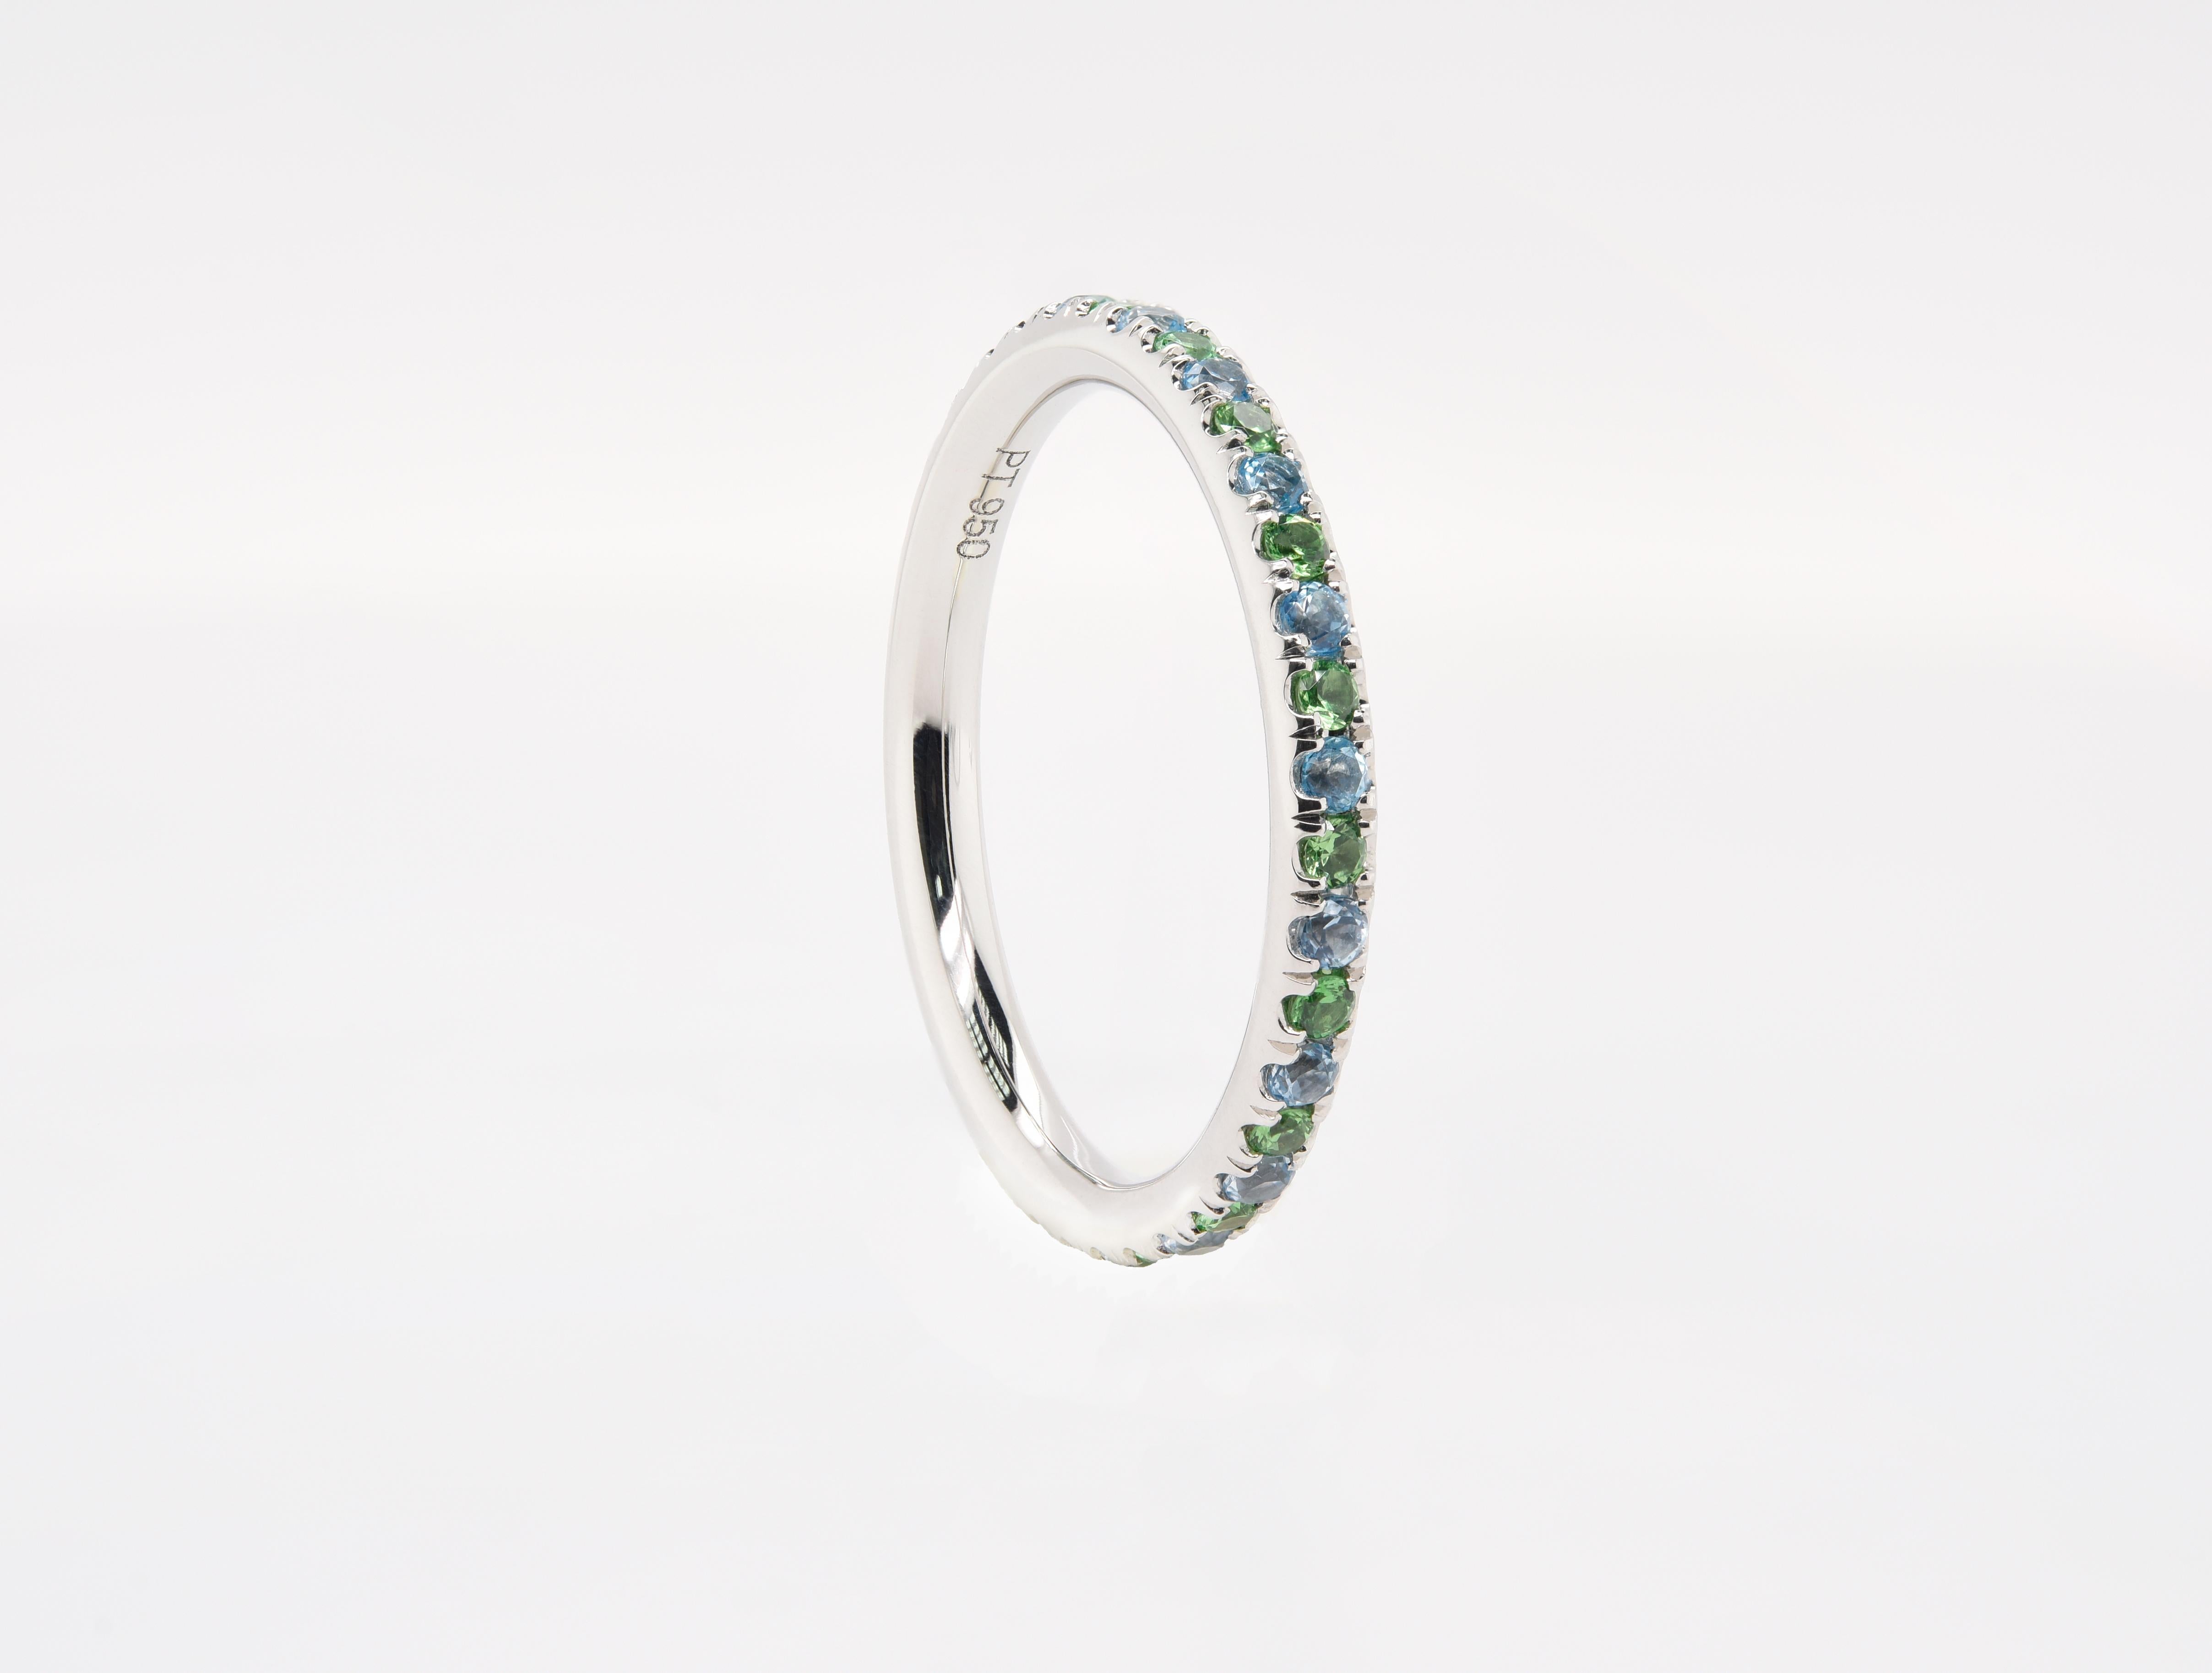 JAG New York Eternity Bands are rings that have the gemstones all the way around the ring. Each ring is custom made to your finger size and you get to pick the gemstones you want. These are truly a way to create your one of a kind ring that allows